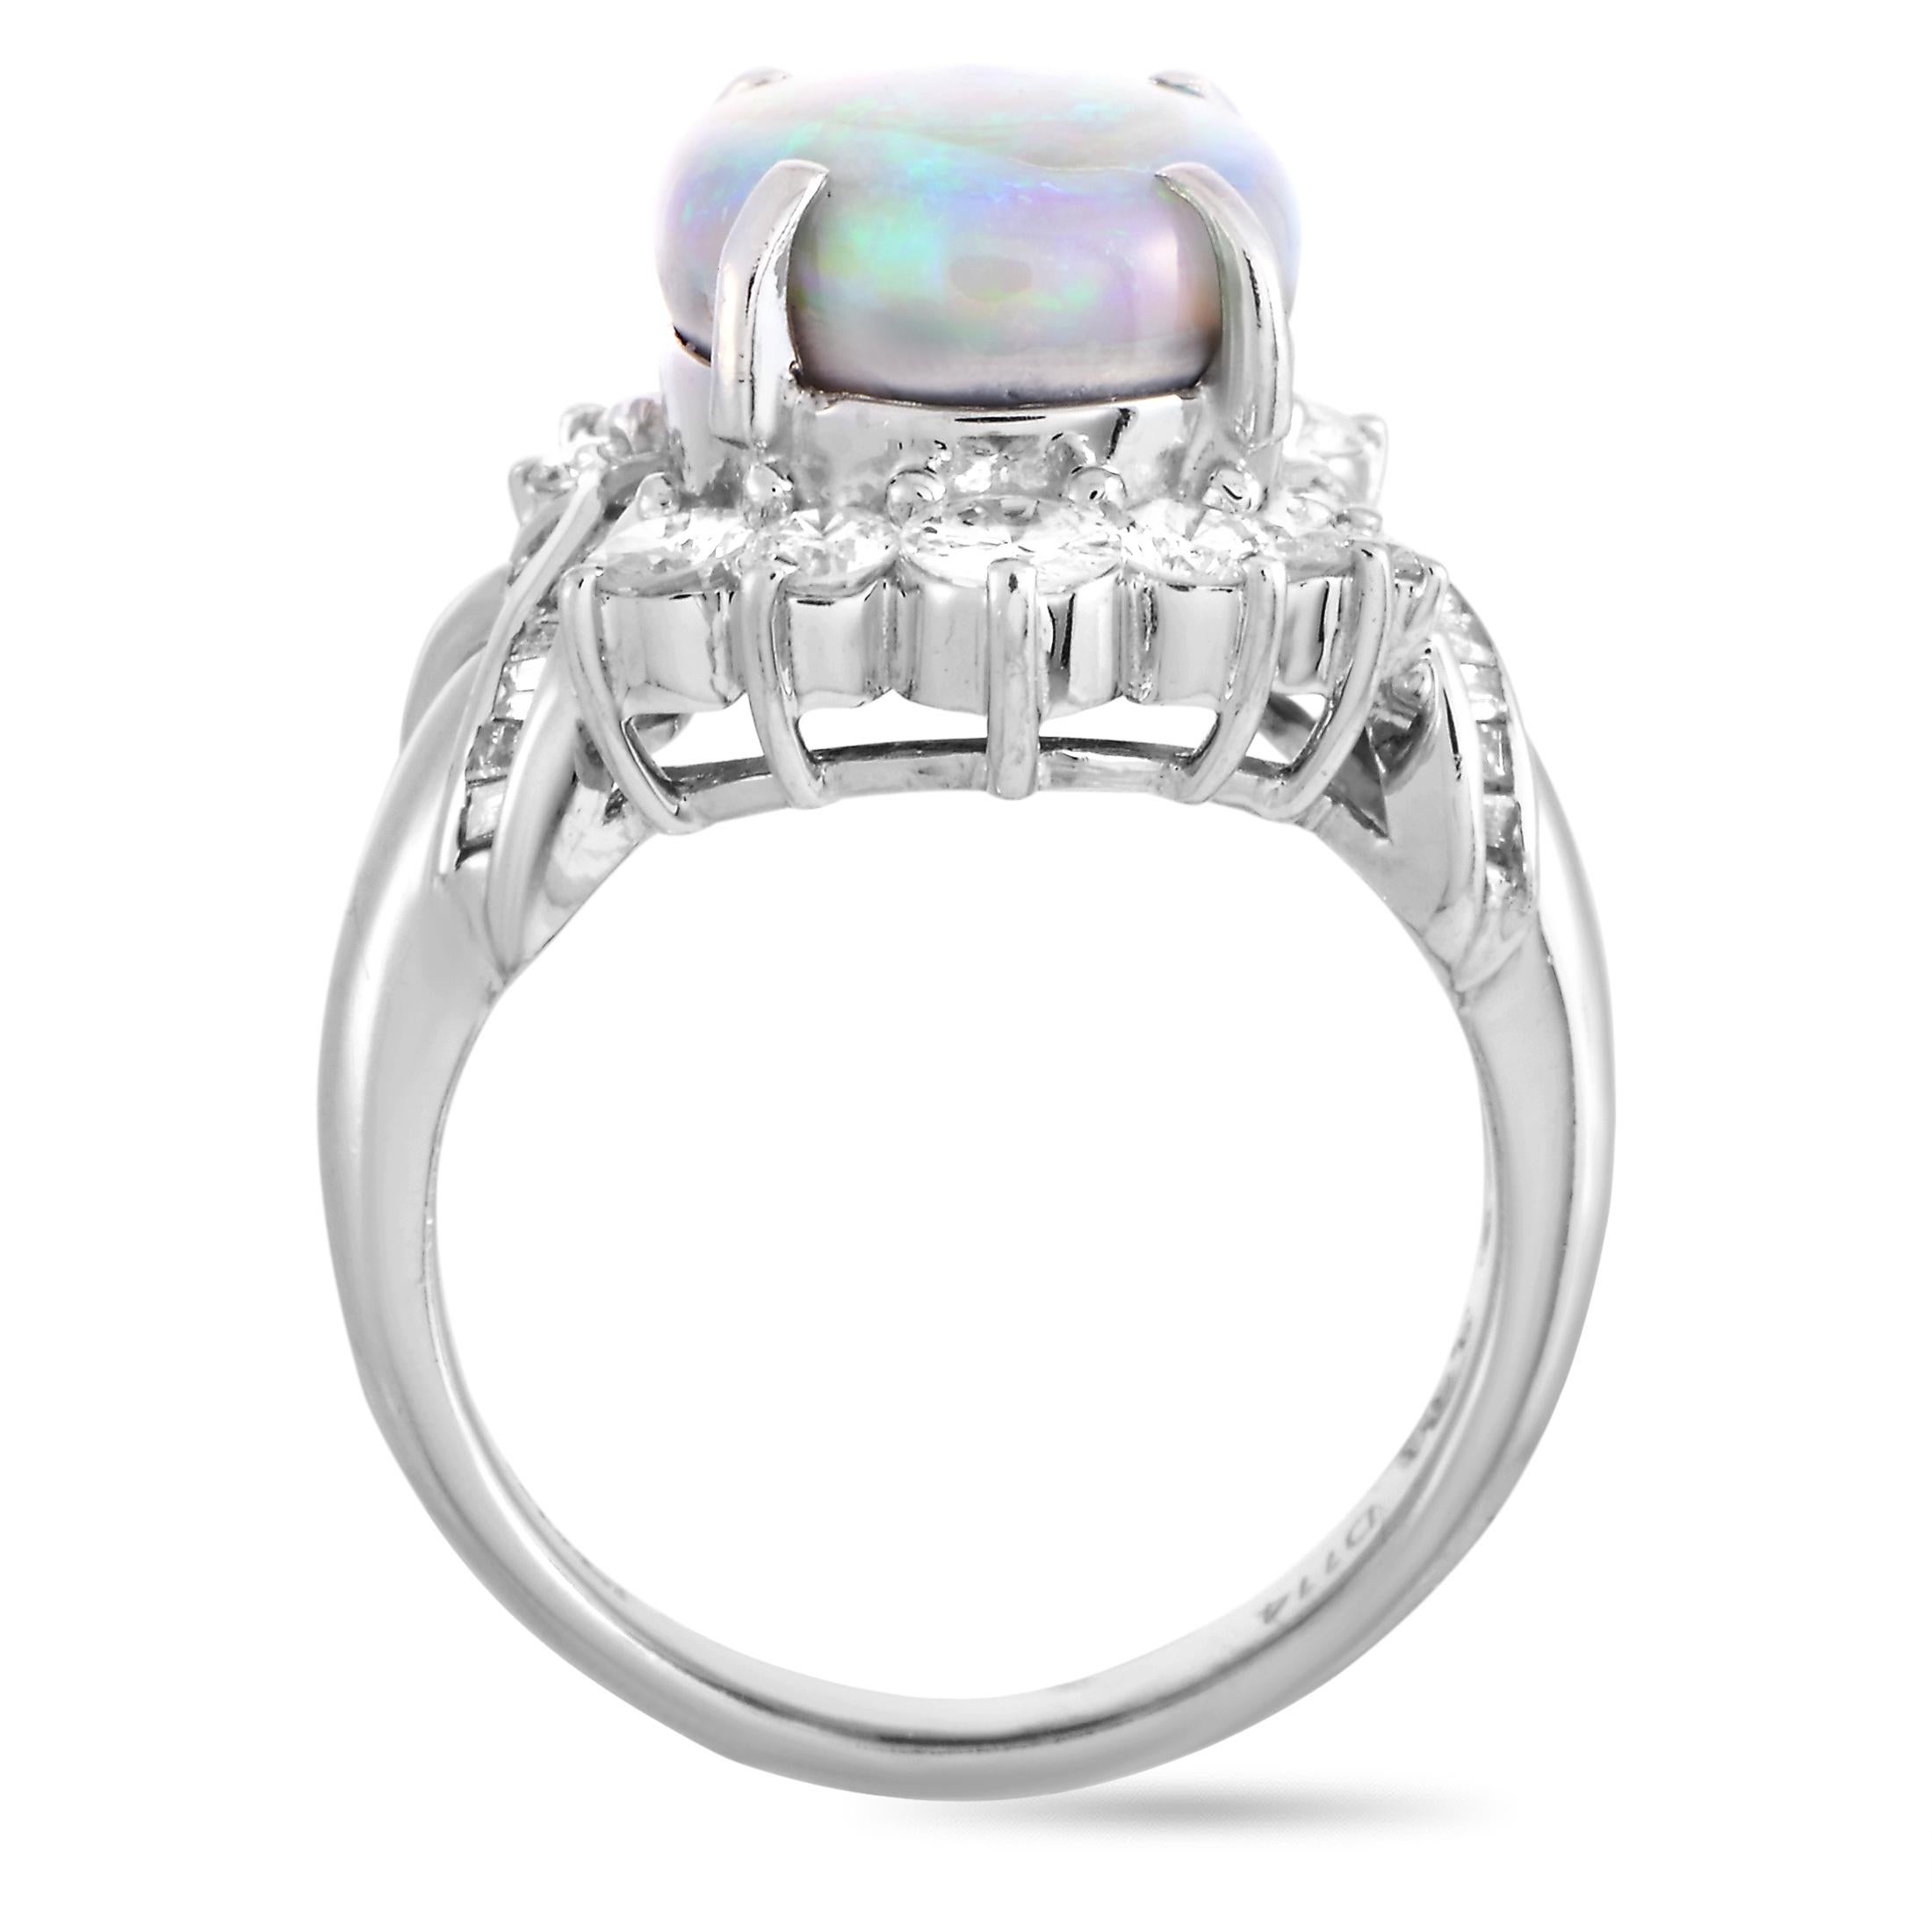 This LB Exclusive ring is made of platinum and set with a 3.63 ct opal and a total of 1.14 carats of diamonds. The ring weighs 10.3 grams, boasting band thickness of 2 mm and top height of 9 mm, while top dimensions measure 20 by 15 mm.
 
 Offered